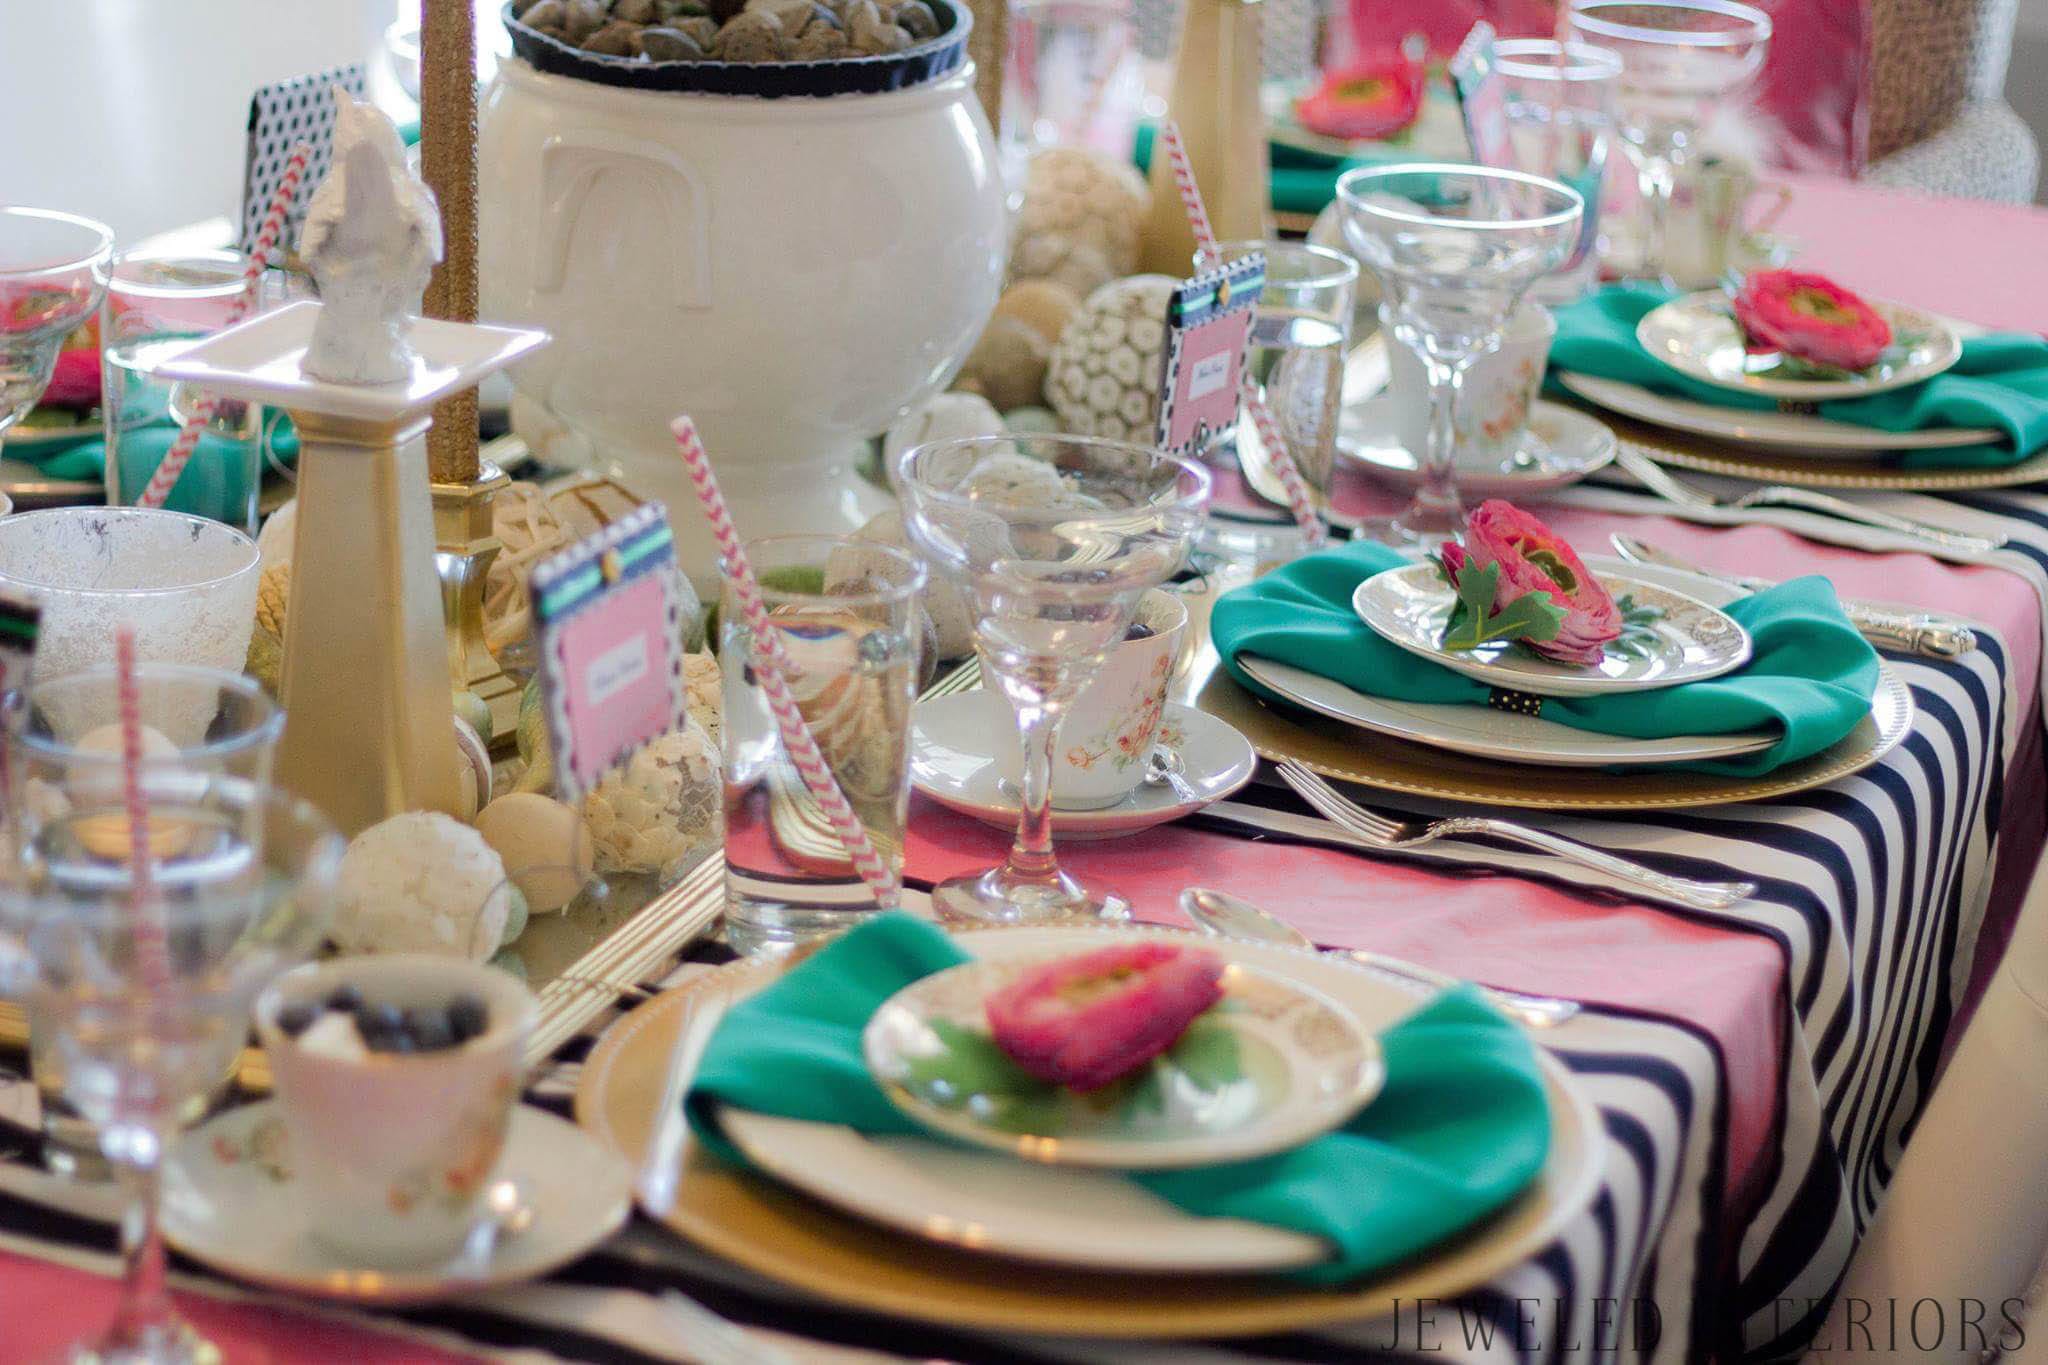 If Kate Spade hosted a vintage tea party